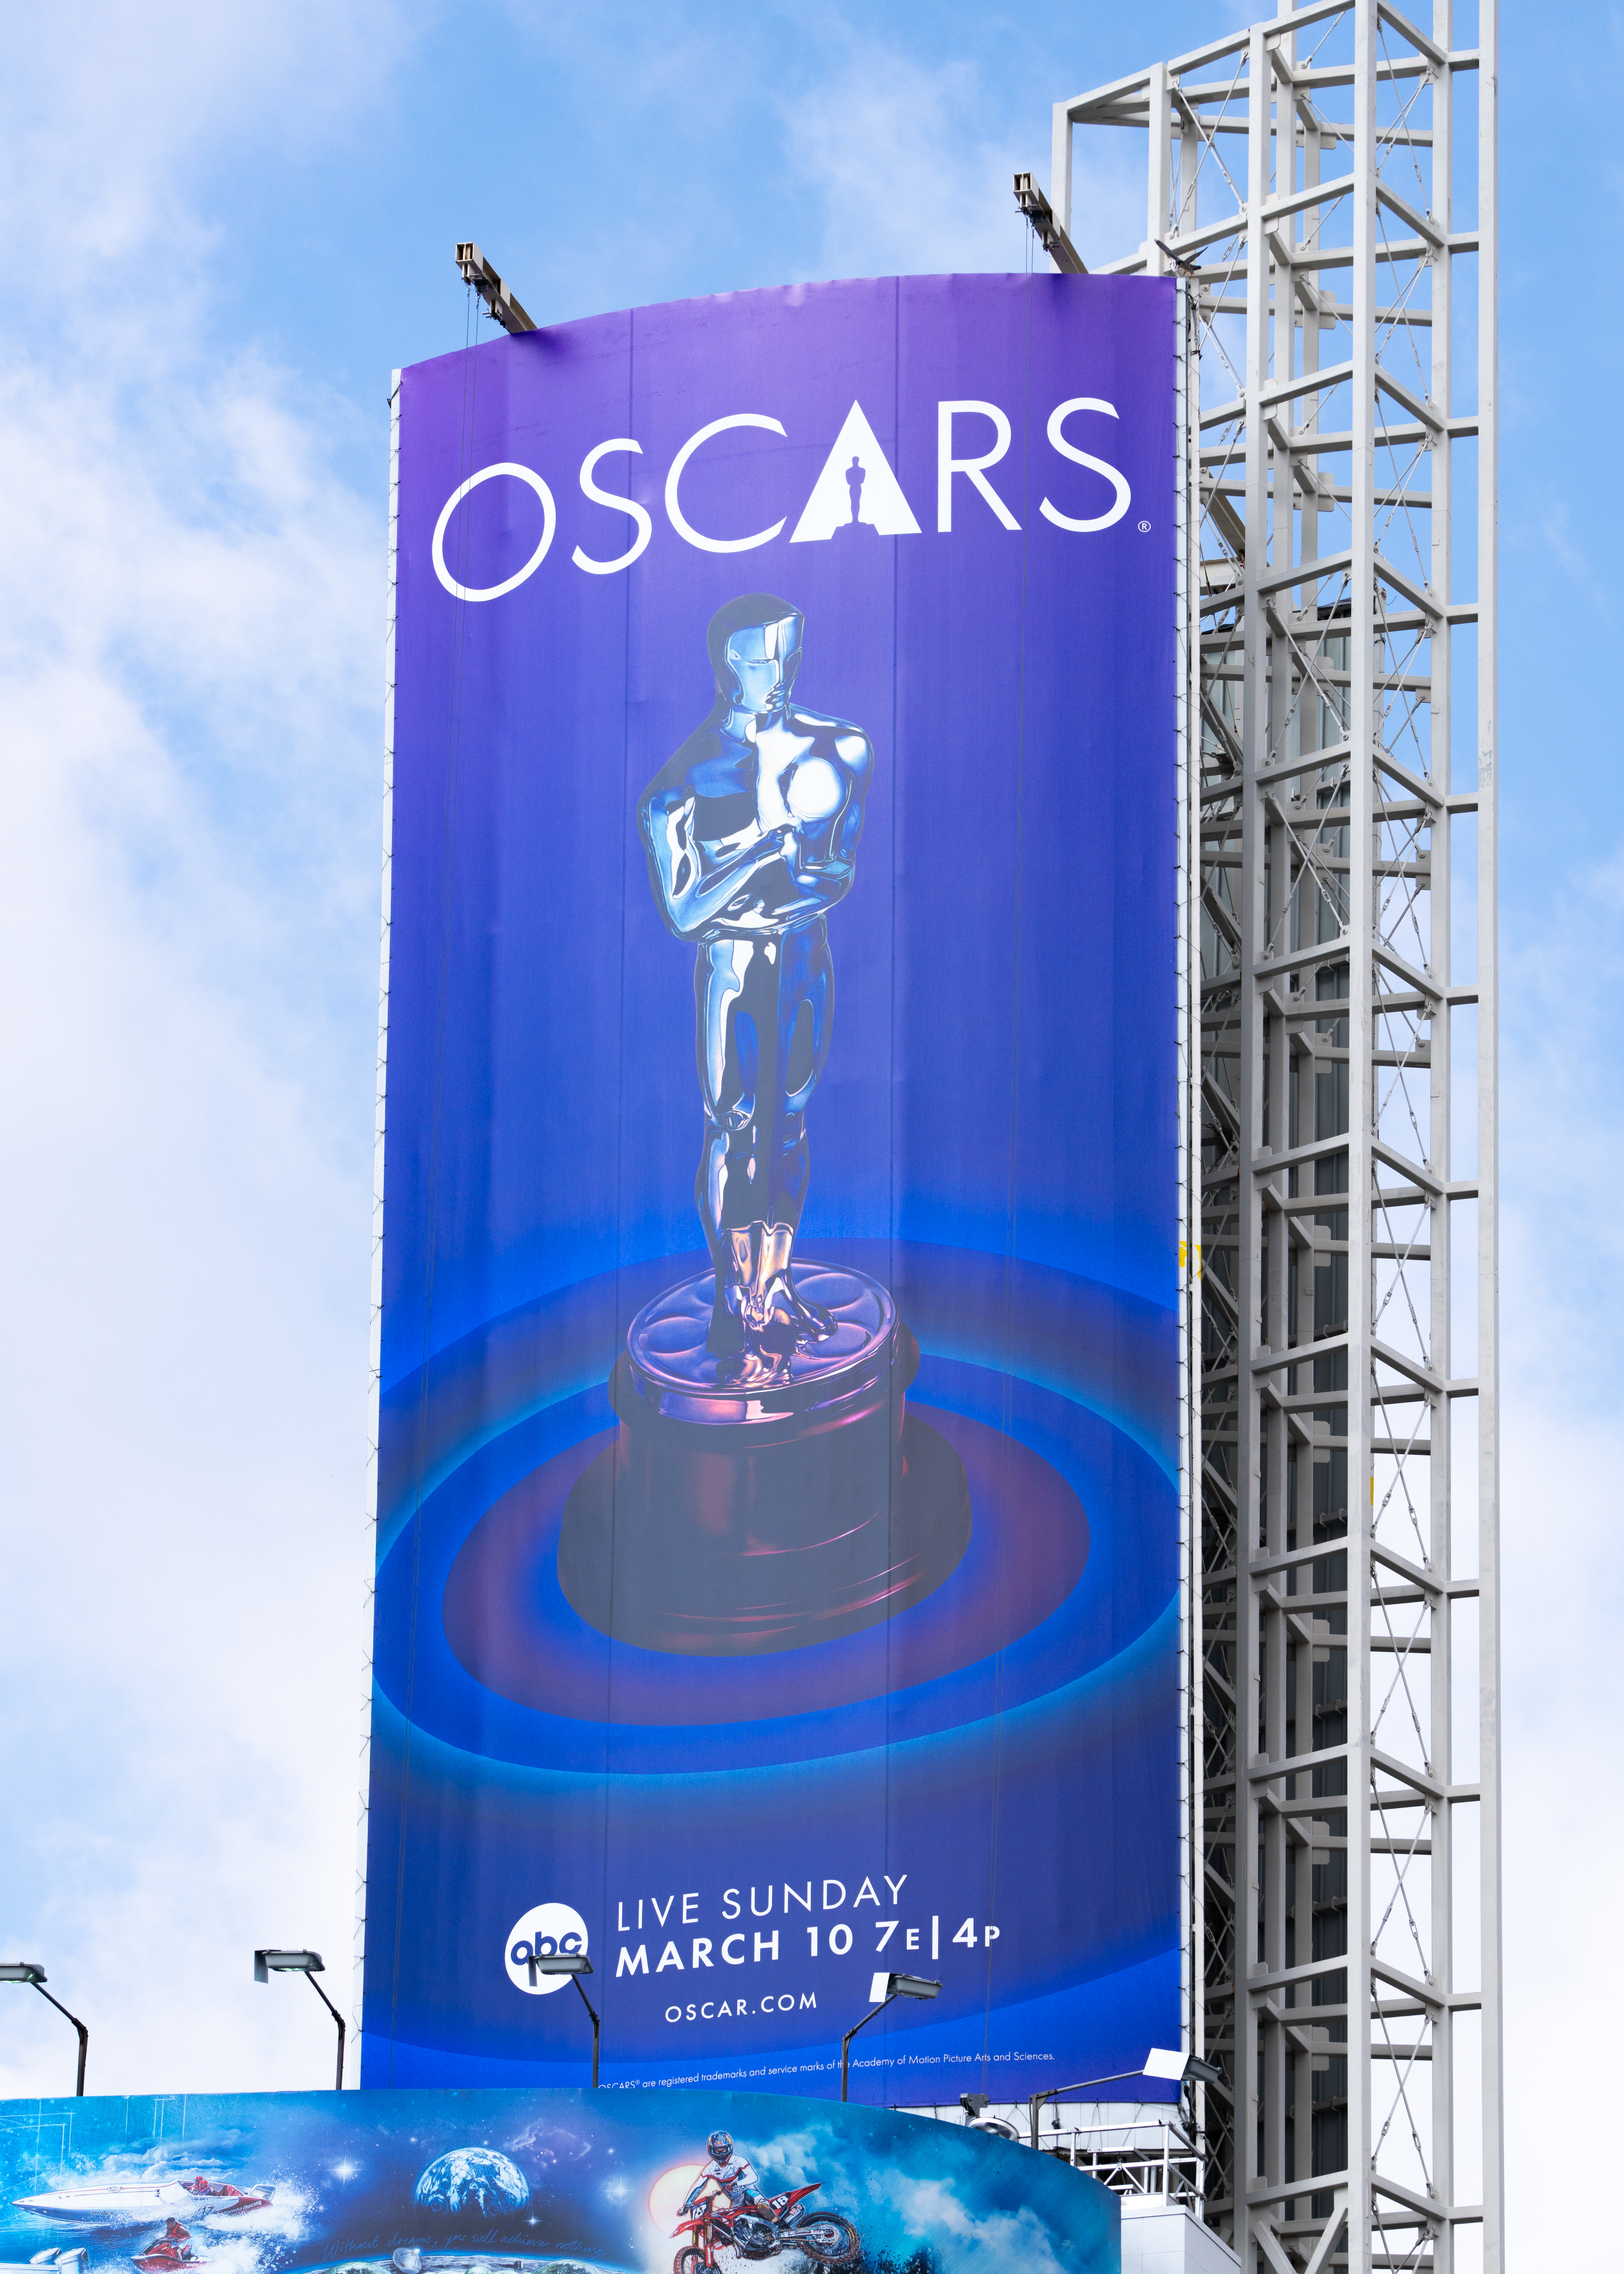 Oscars advertisement banner featuring the iconic statuette, date, and broadcast information: &quot;Live Sunday March 10 7E/4P&quot;